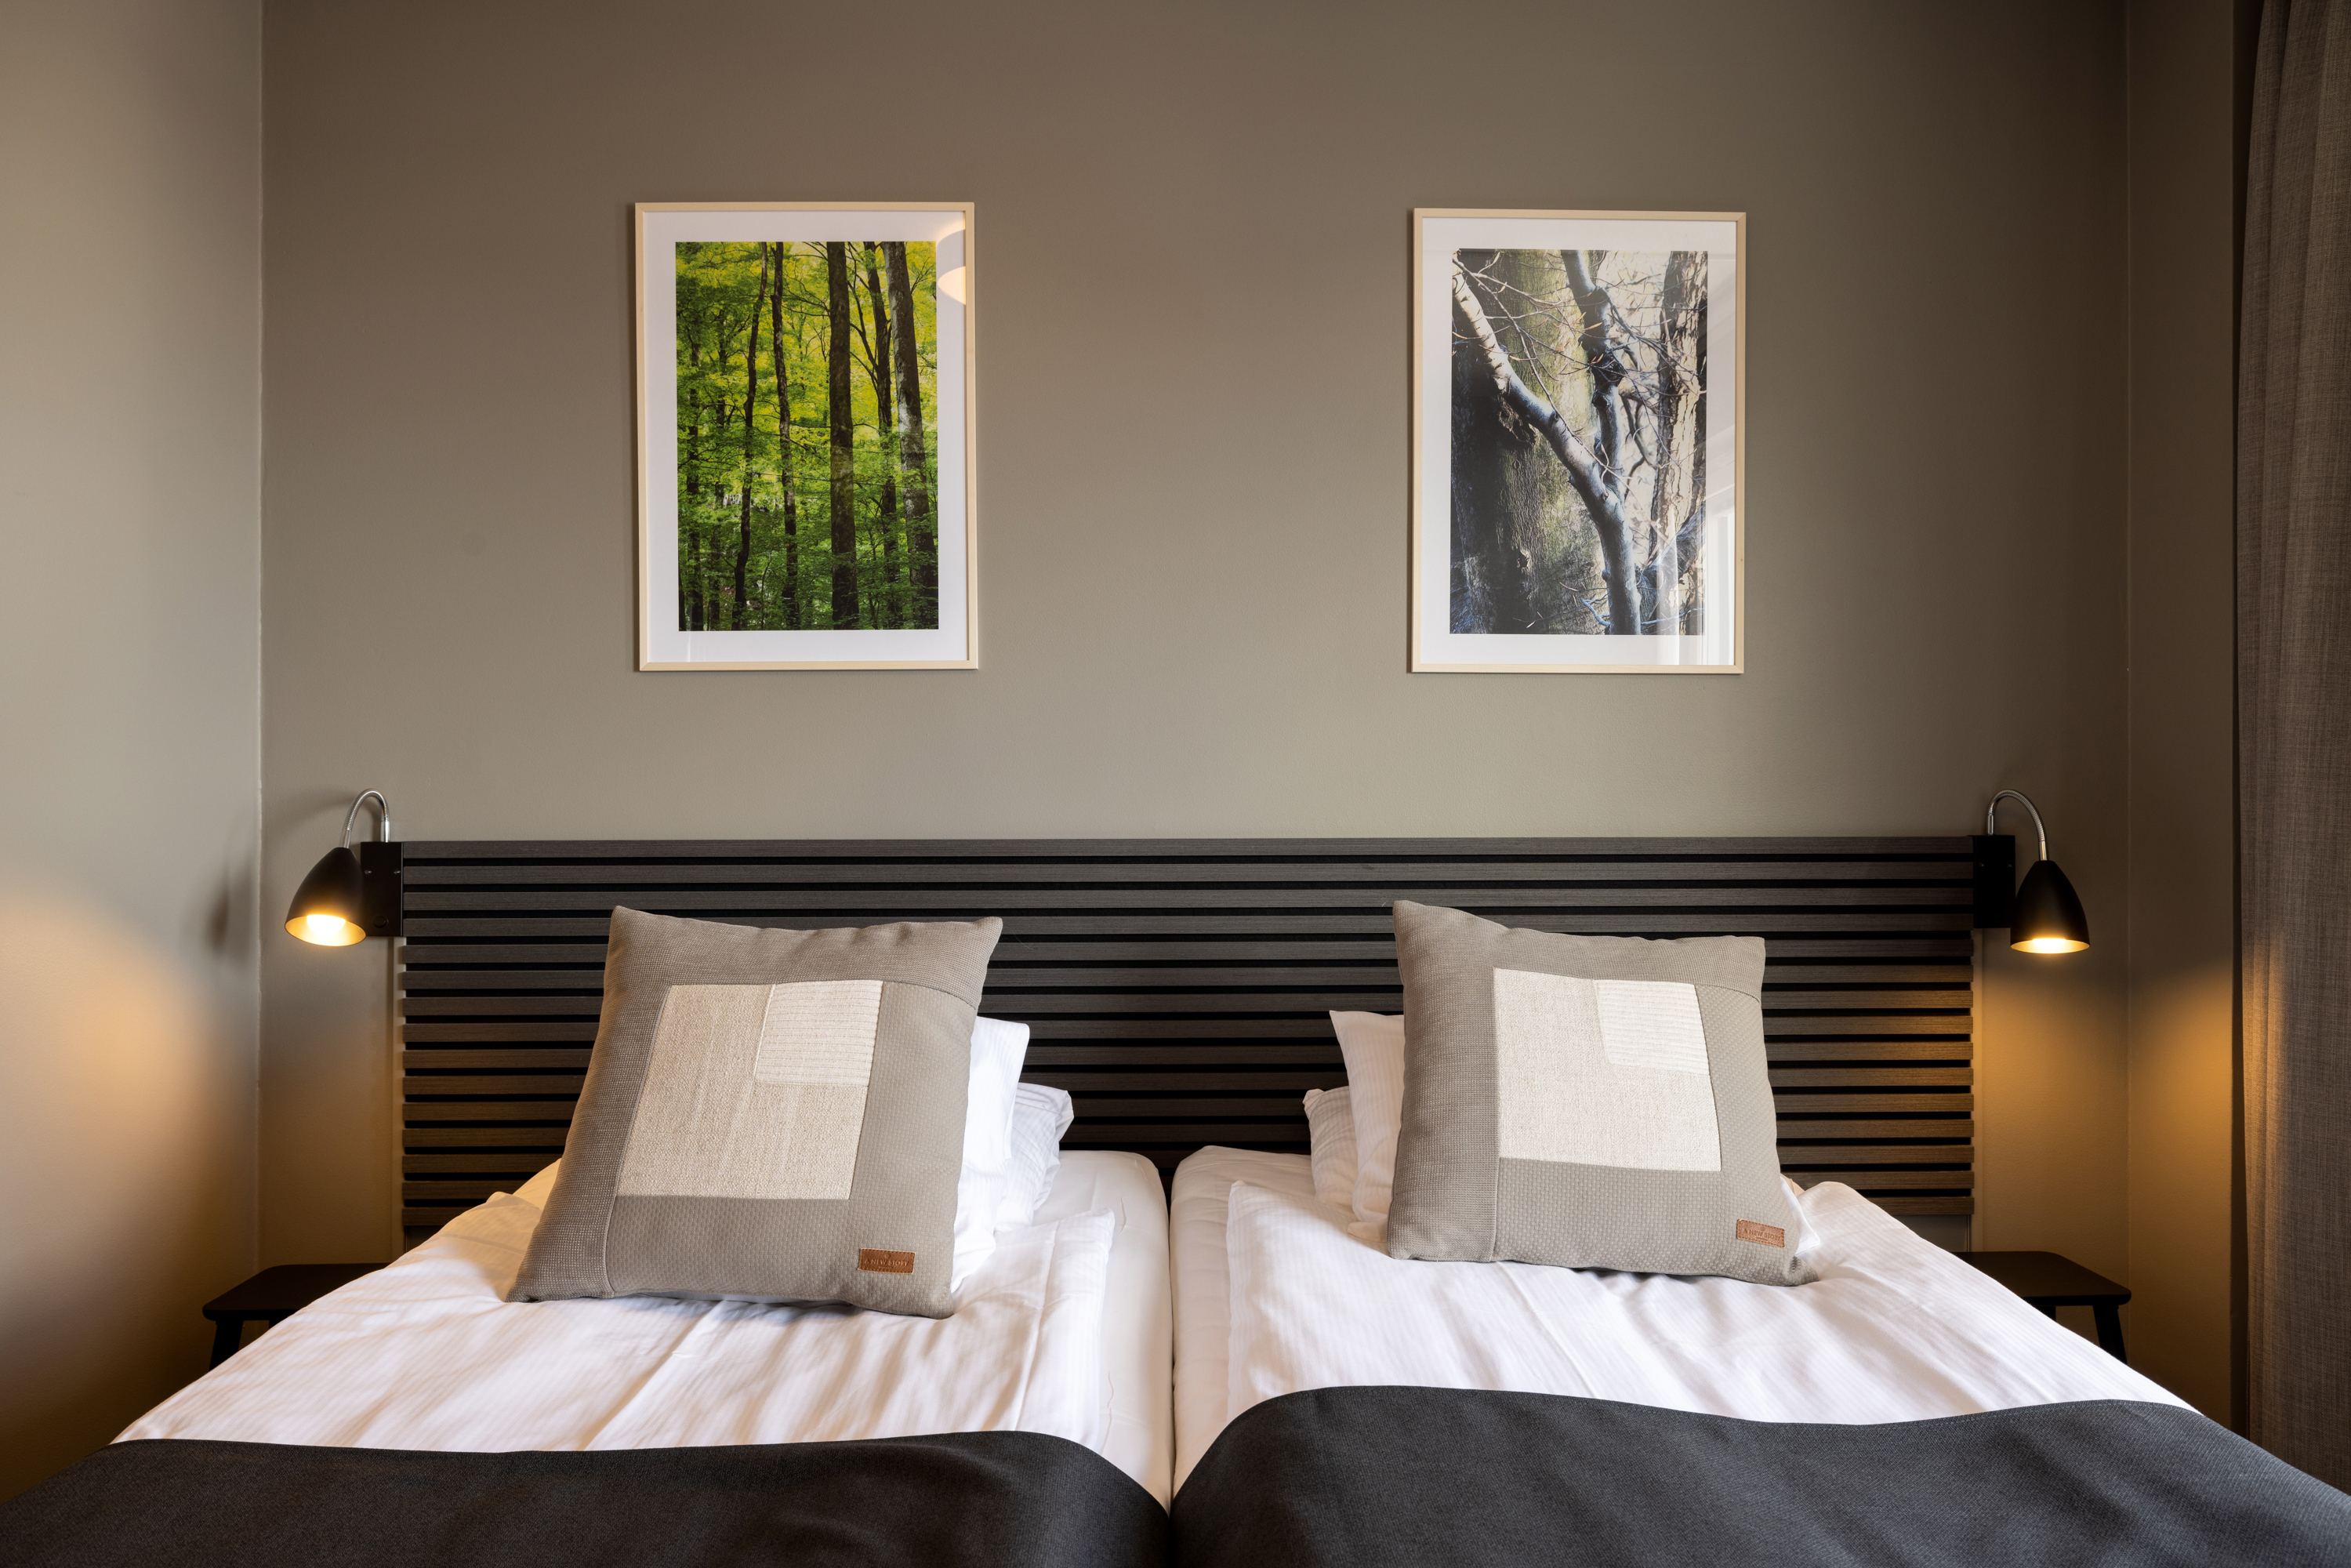 Hotel room with beds, black headboard and paintings